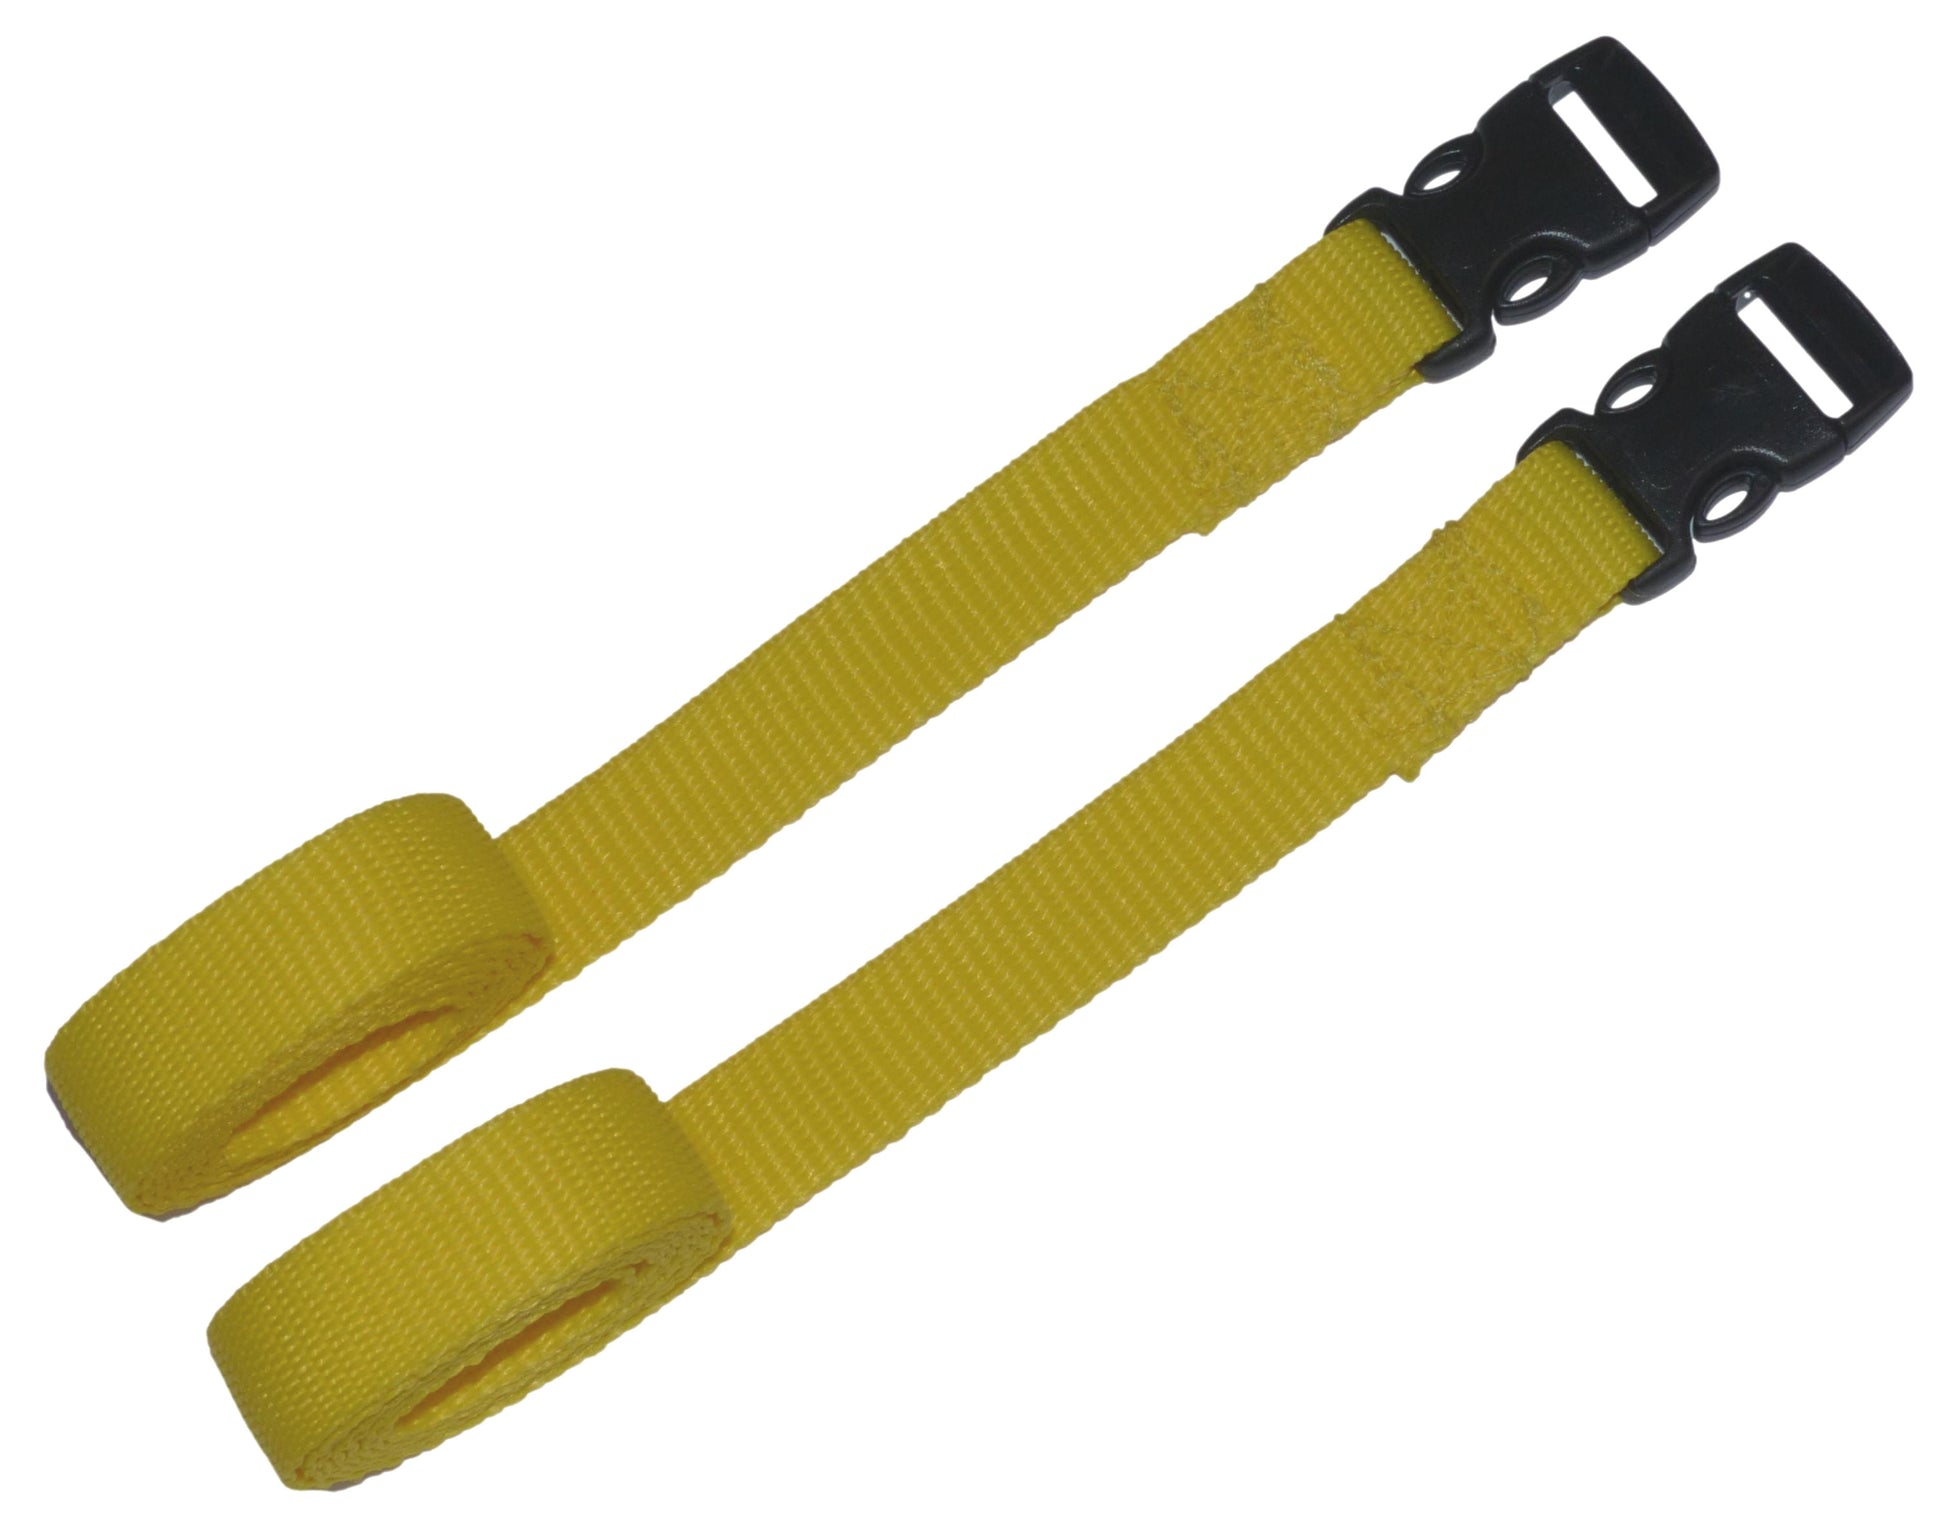 Benristraps 19mm Webbing Strap with Quick Release Buckle (Pair) – Musmate  Ltd